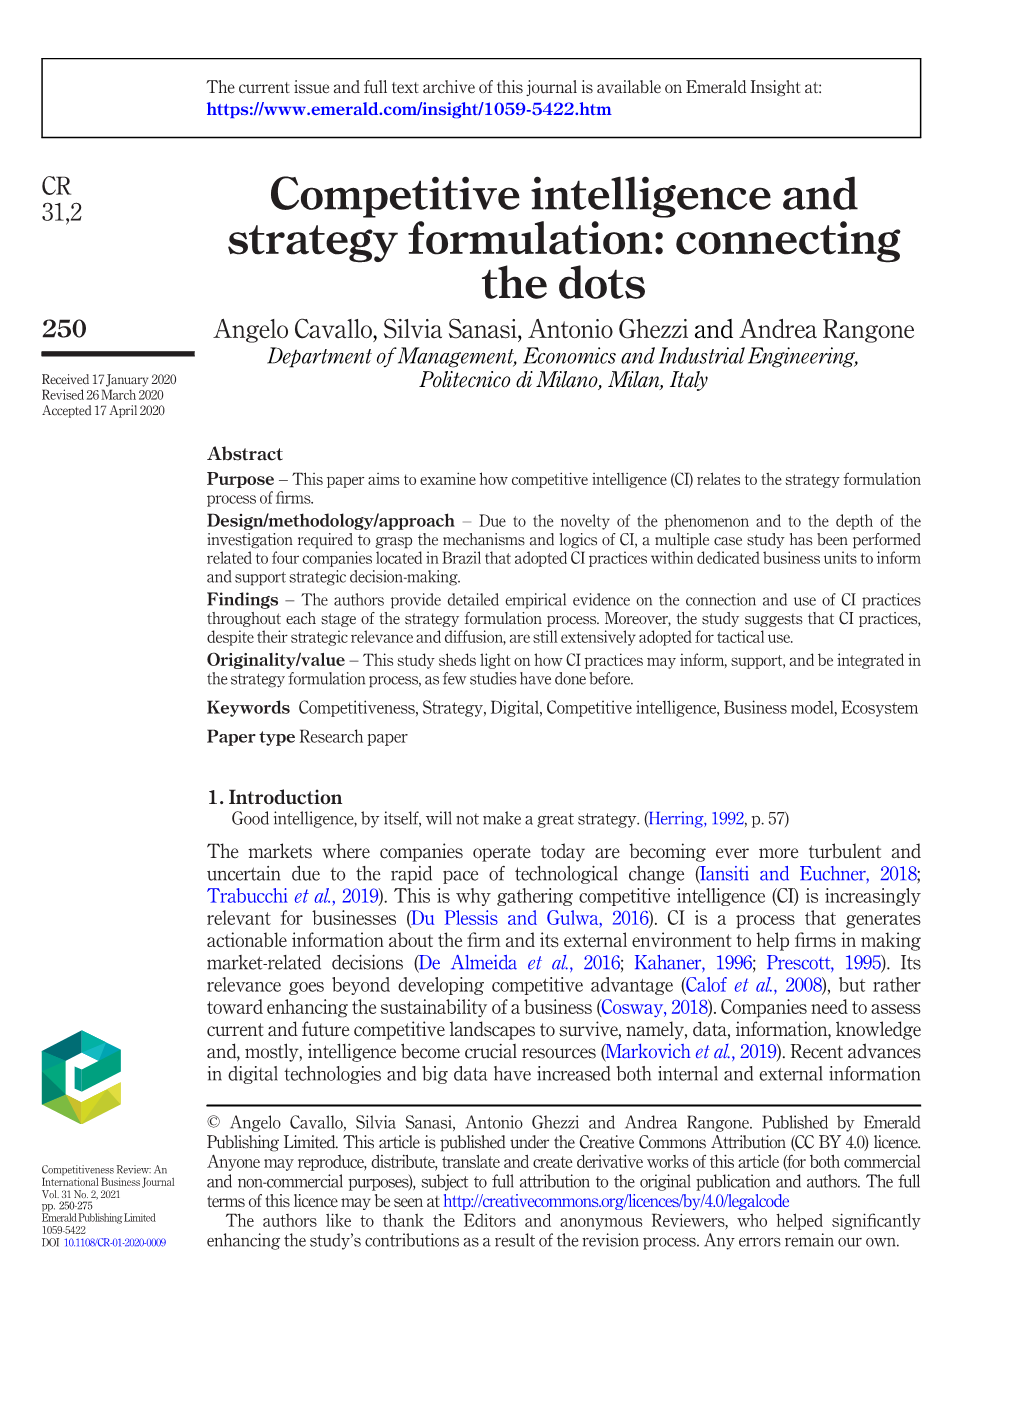 Competitive Intelligence and Strategy Formulation: Connecting the Dots